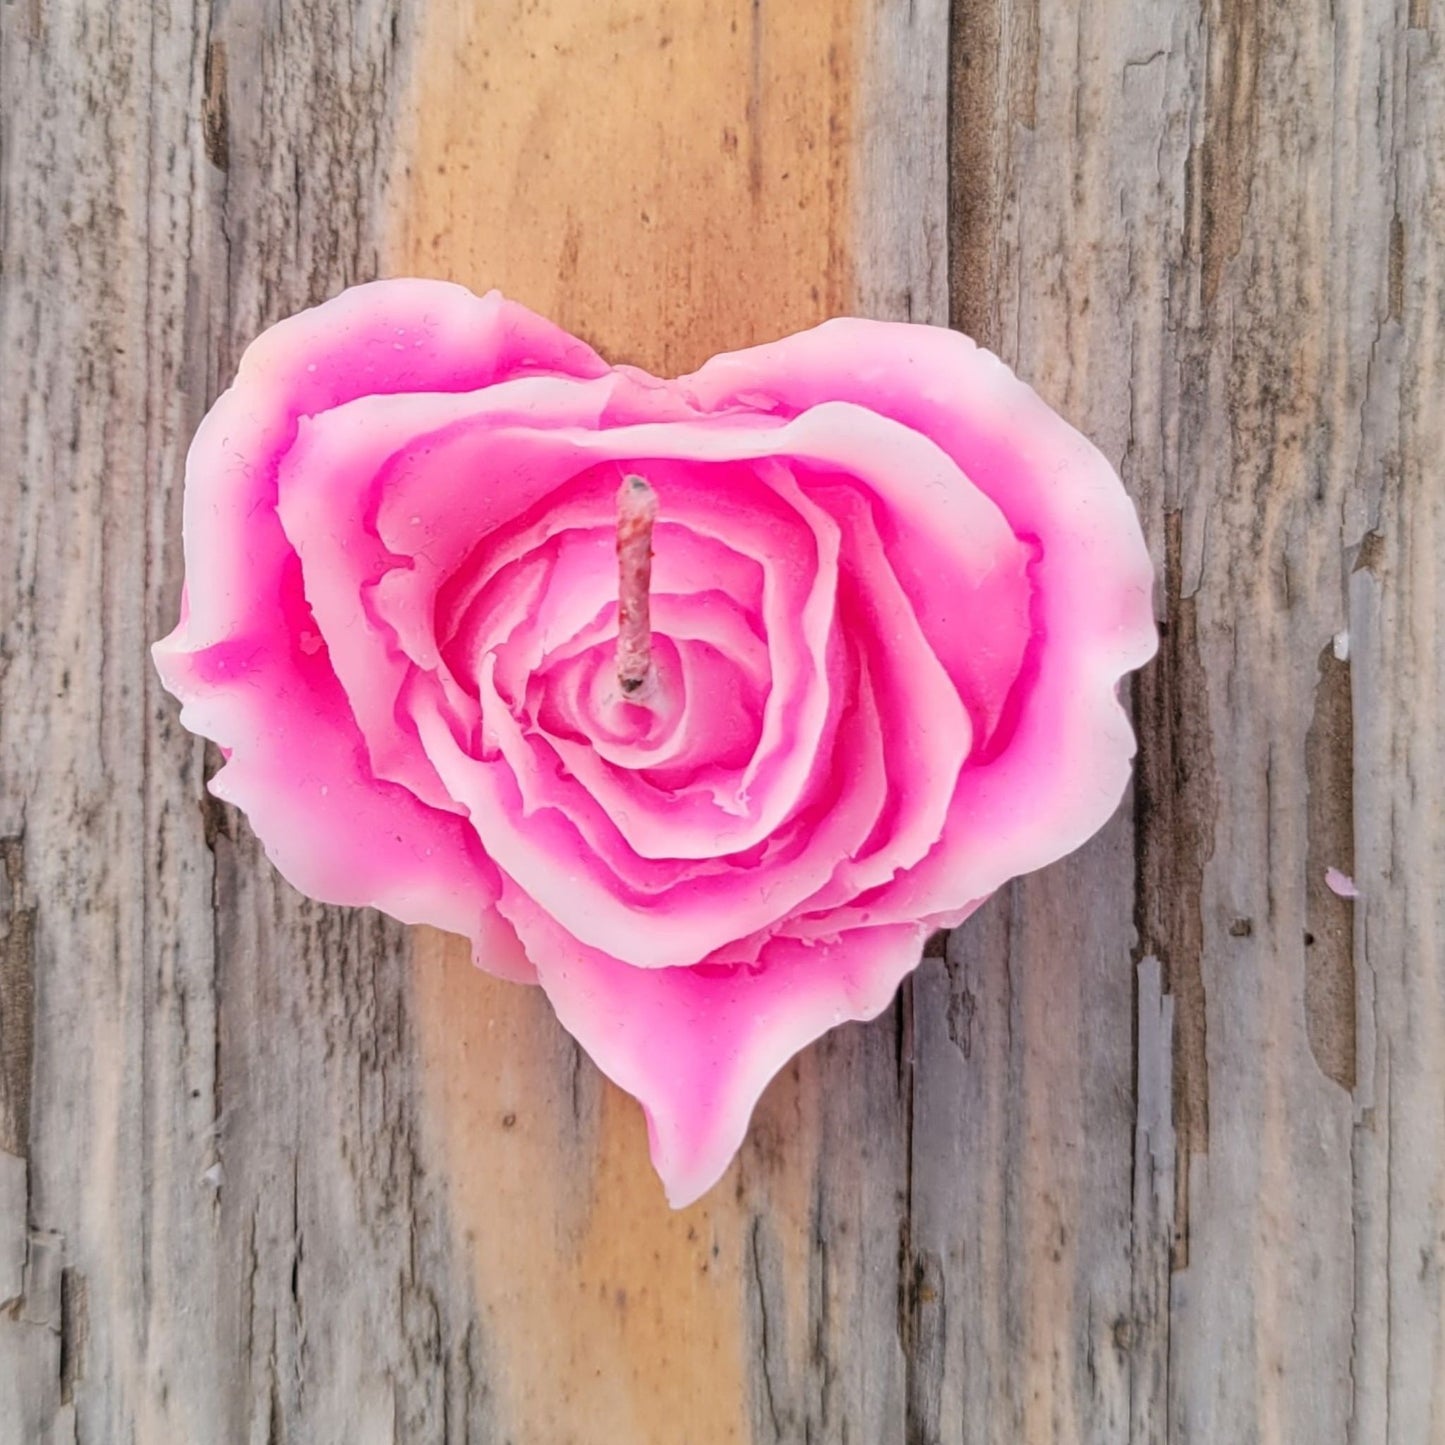 A handmade heart shaped flower votive candle in pink with white edges.